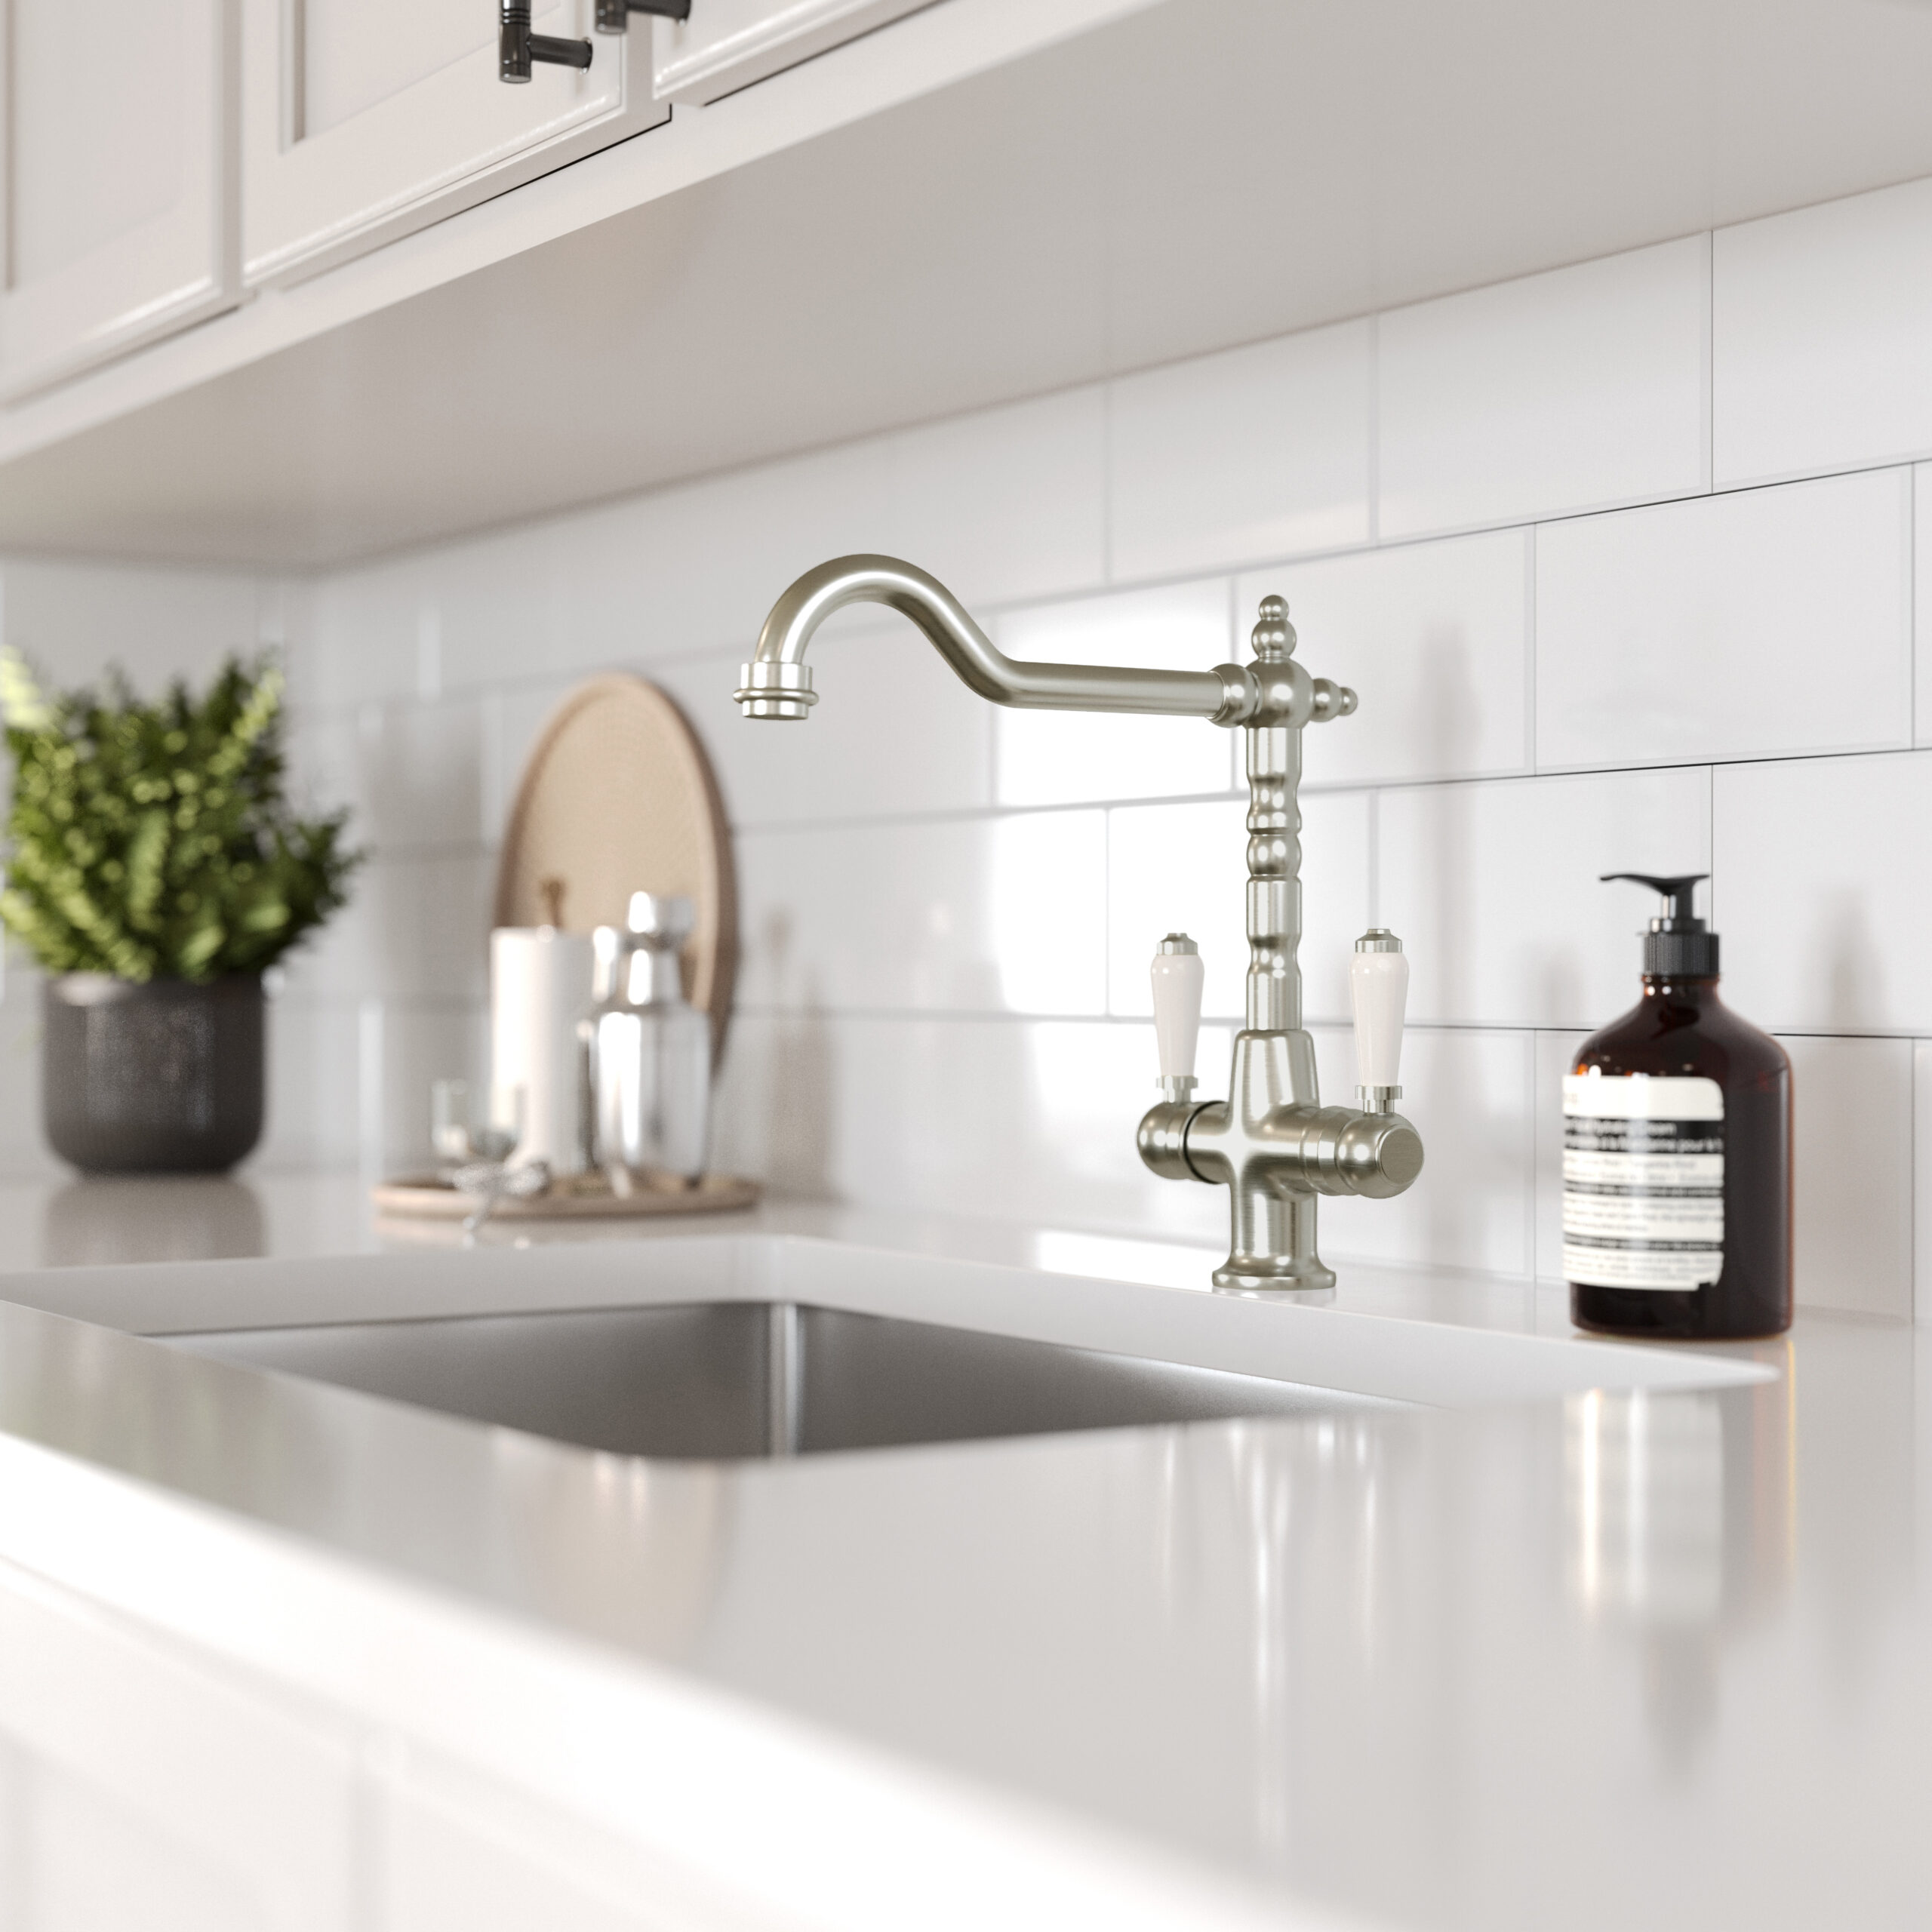 Alma brushed chrome dual lever tap with white ceramic handles with a brushed chrome sink in a white kitchen